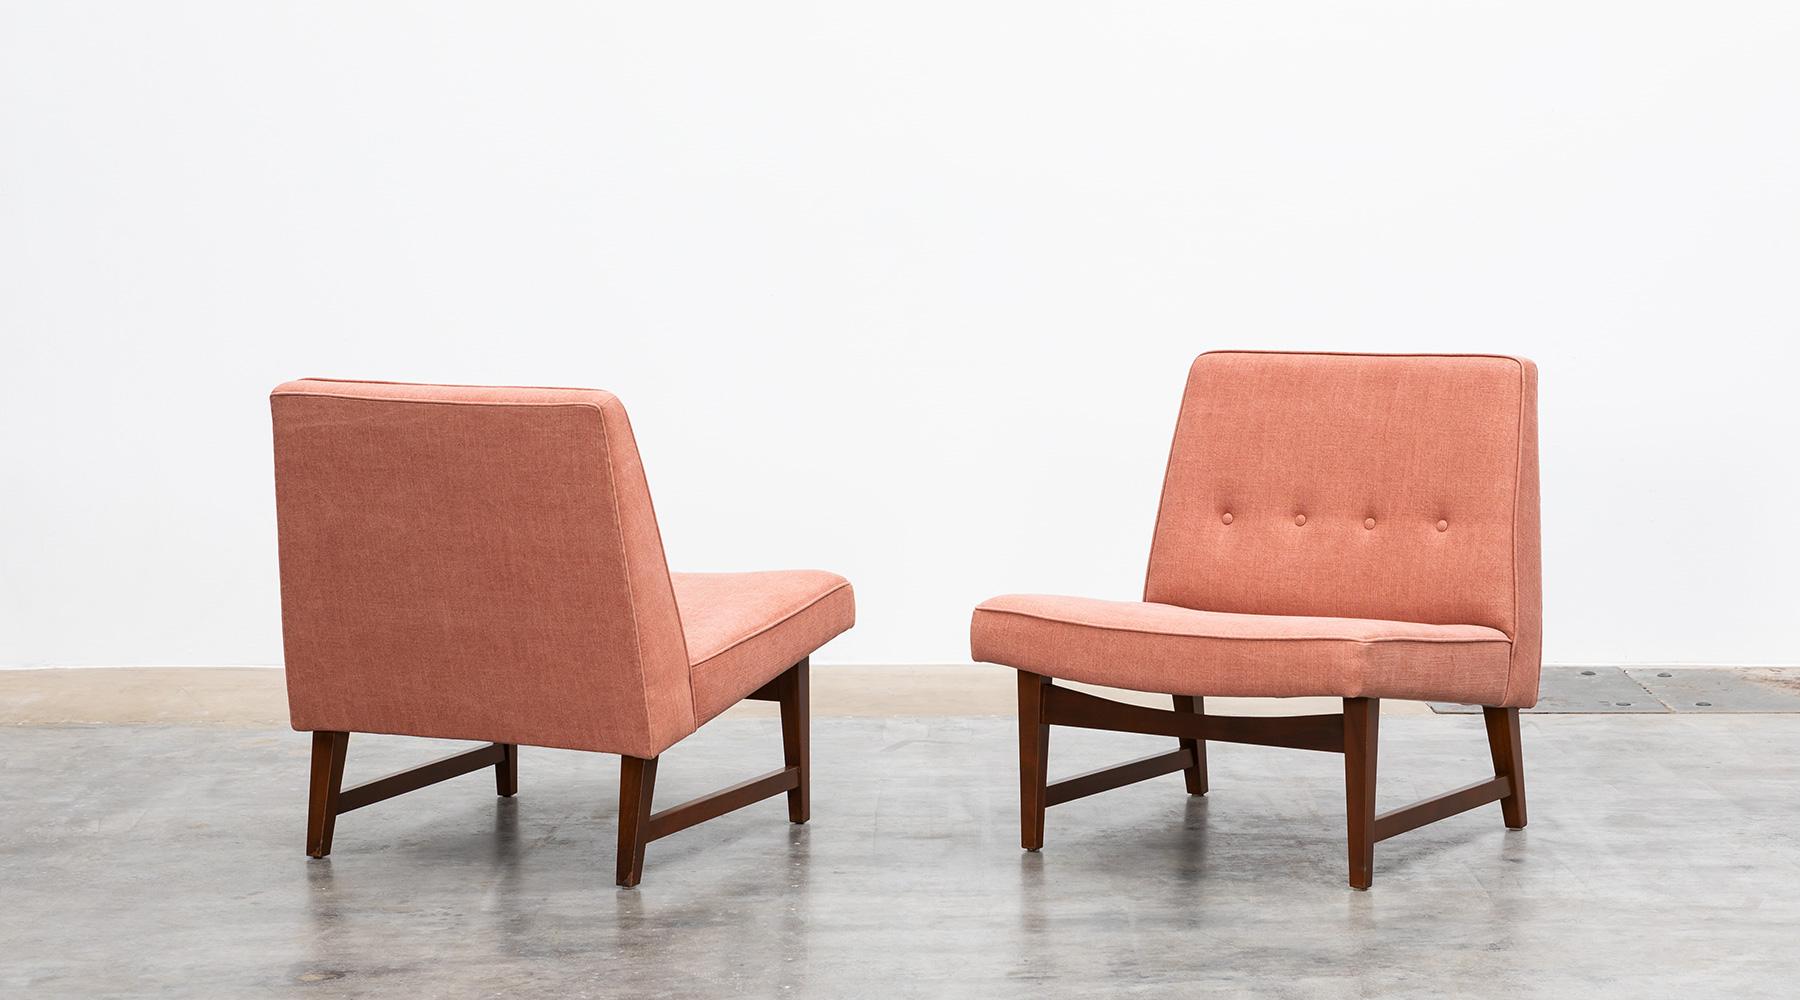 Lounge Chairs, new upholstery, mahogany, Edward Wormley, USA, 1955.

Magnificent matching lounge chairs designed by Edward Wormley. Manufactured by Dunbar. Matching Sofa in stock. Please check 1stDibs Ref: LU958522960752. The clean-lined, stunning